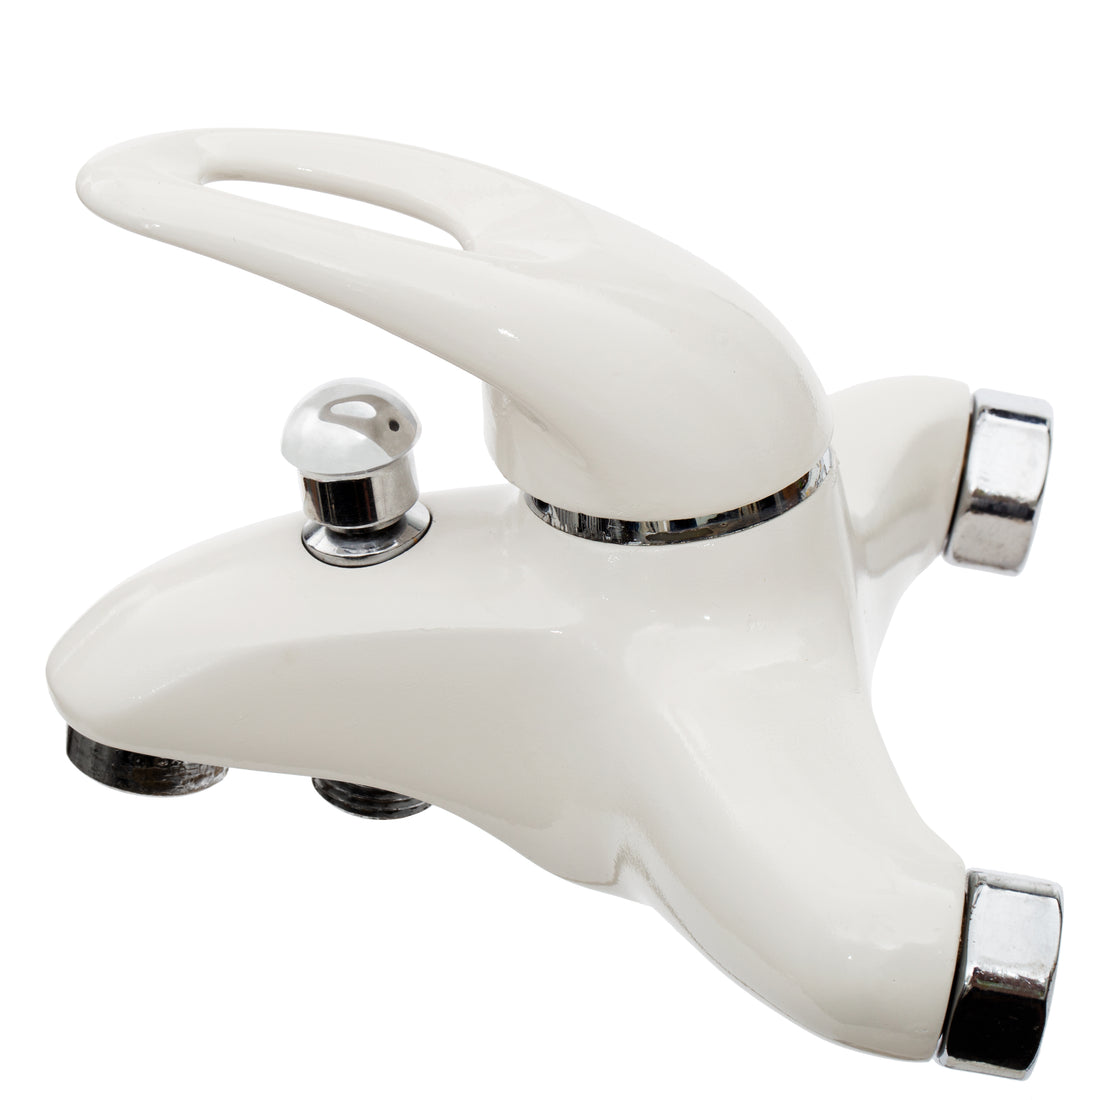 What are Ceramic Disk Taps - A Detailed Guide